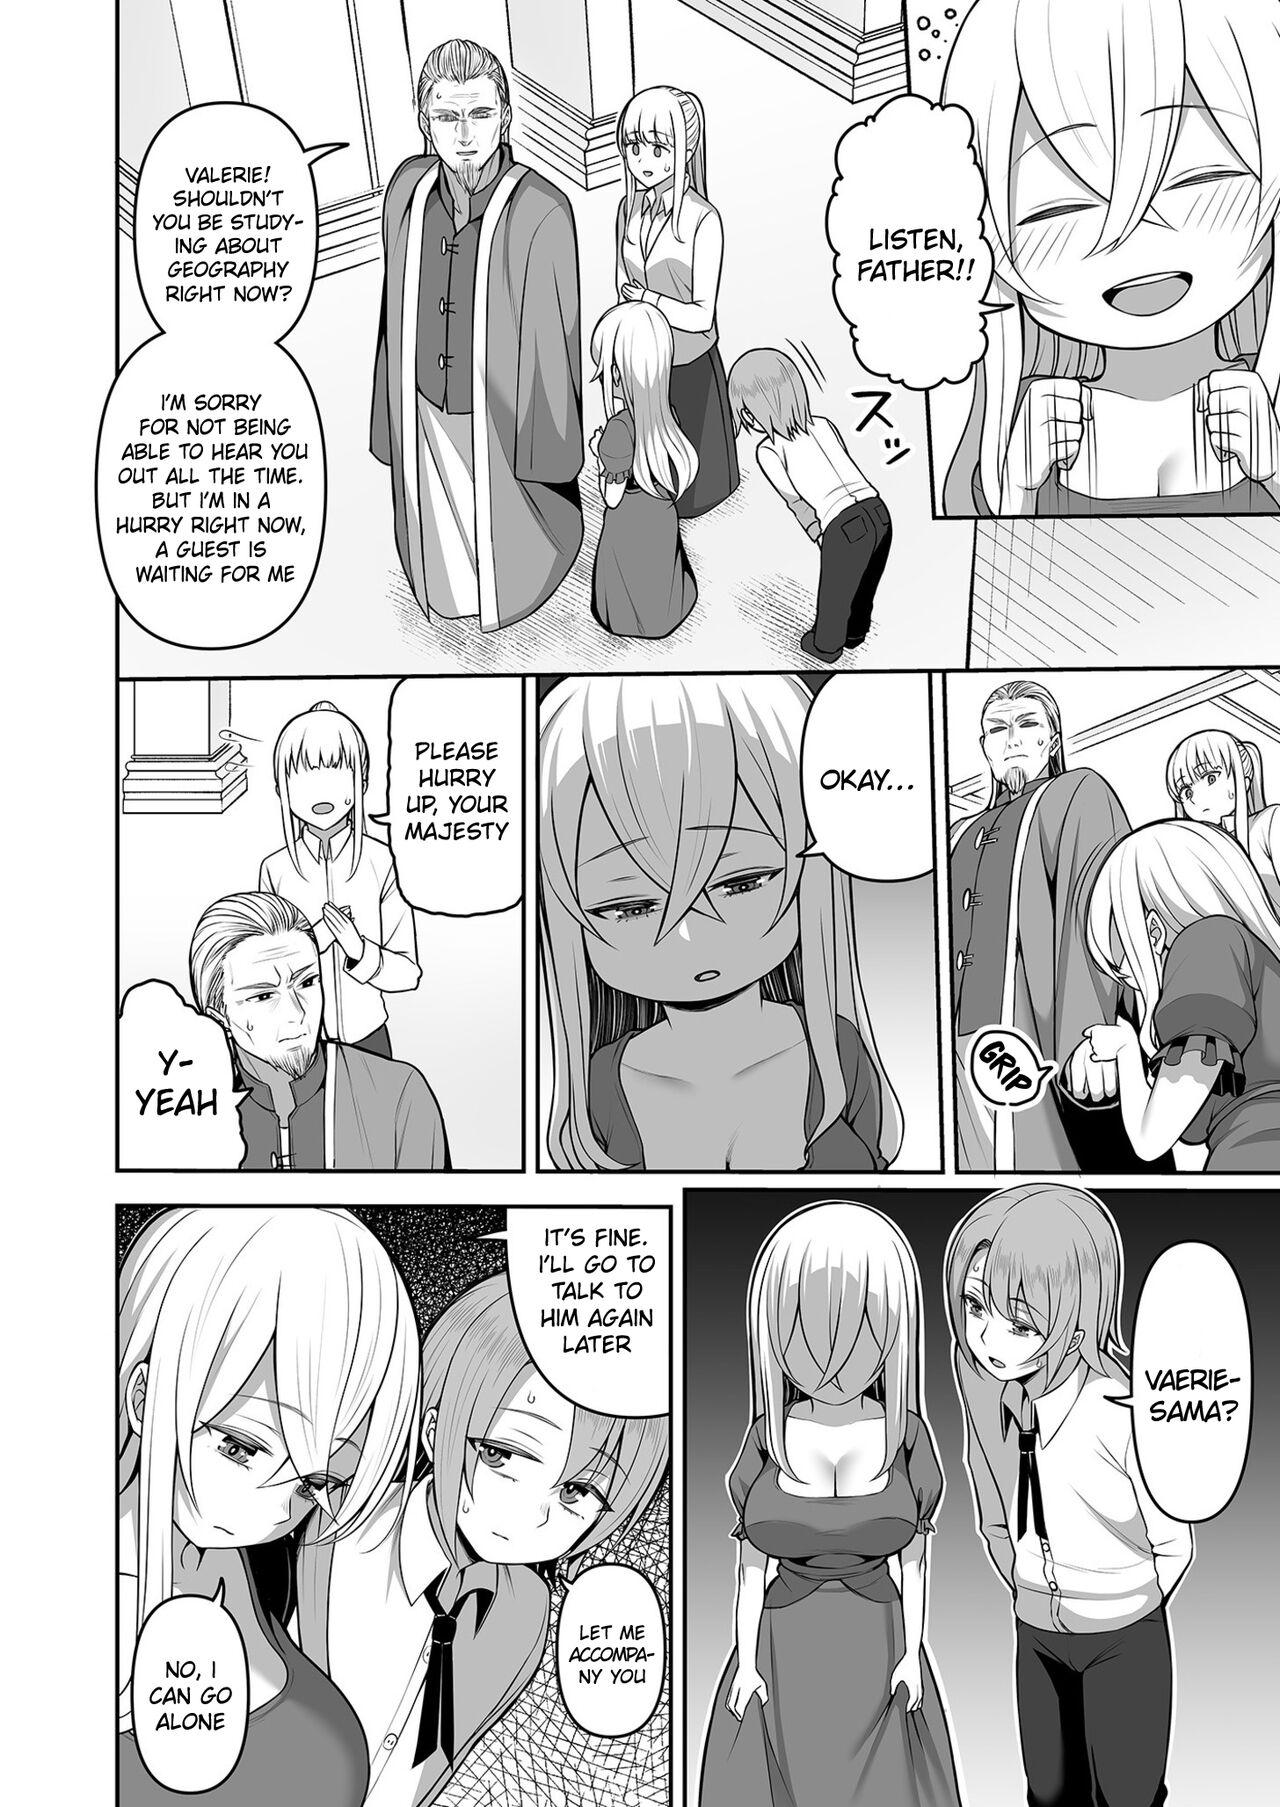 Gay Orgy [Kayumidome] Valerie Monogatari ~Oujo-sama wa Yaritai Houdai!?~ Ch1/ The Story of Valerie ~The Queen Gets To Fuck As Much As She Wants!~ Ch.1 [English] {Doujins.com} Stepsister - Page 6